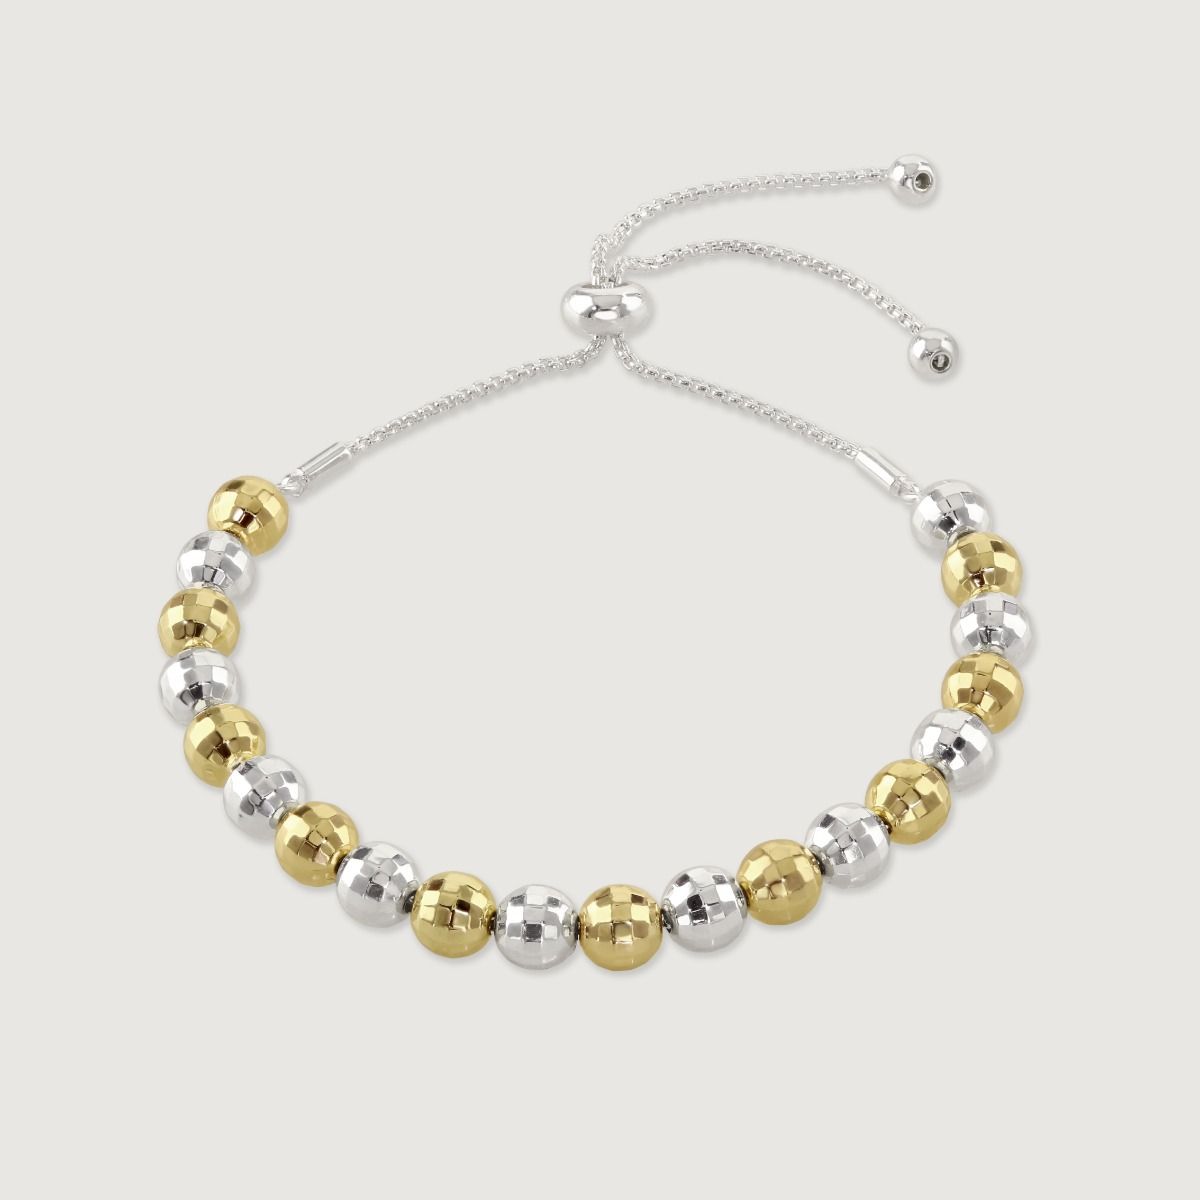 This charming beaded friendship bracelet is a delightful accessory that celebrates the bond between friends. Handcrafted with love, it showcases vibrant beads that add a pop of colour to any ensemble. With its adjustable design, it's a versatile piece tha